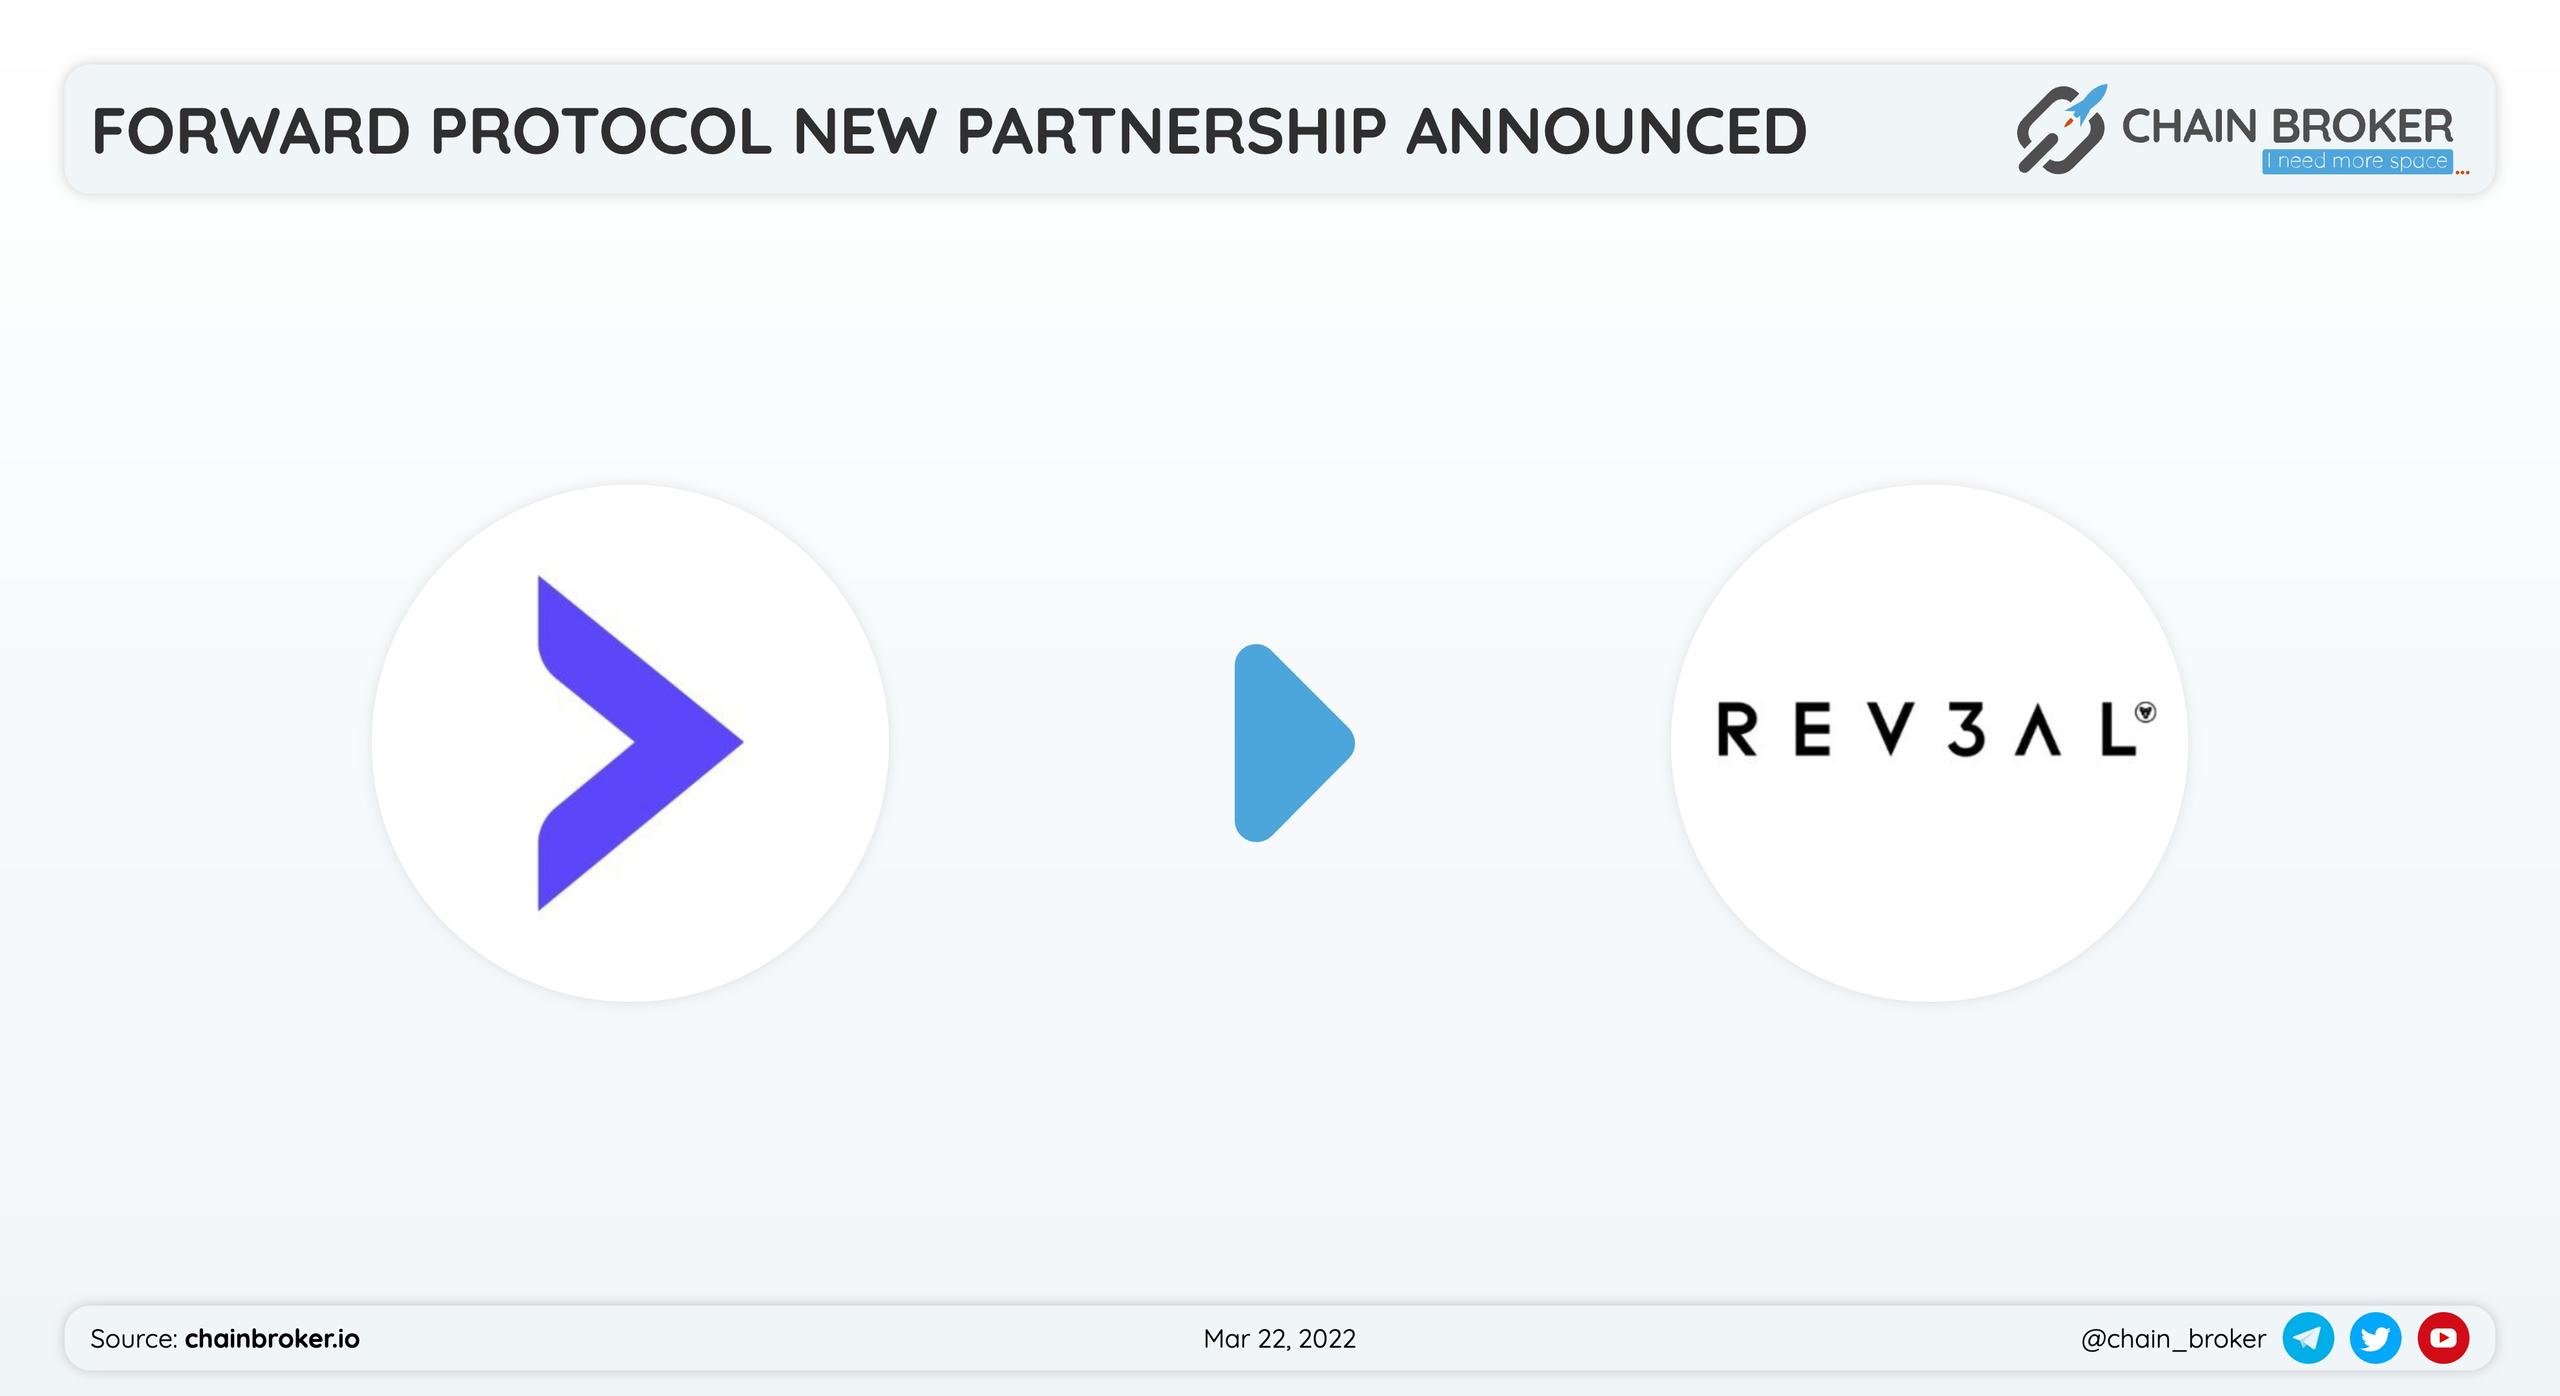 Forward Protocol  has partnered with Rev3alTech for an upgrade of protection.